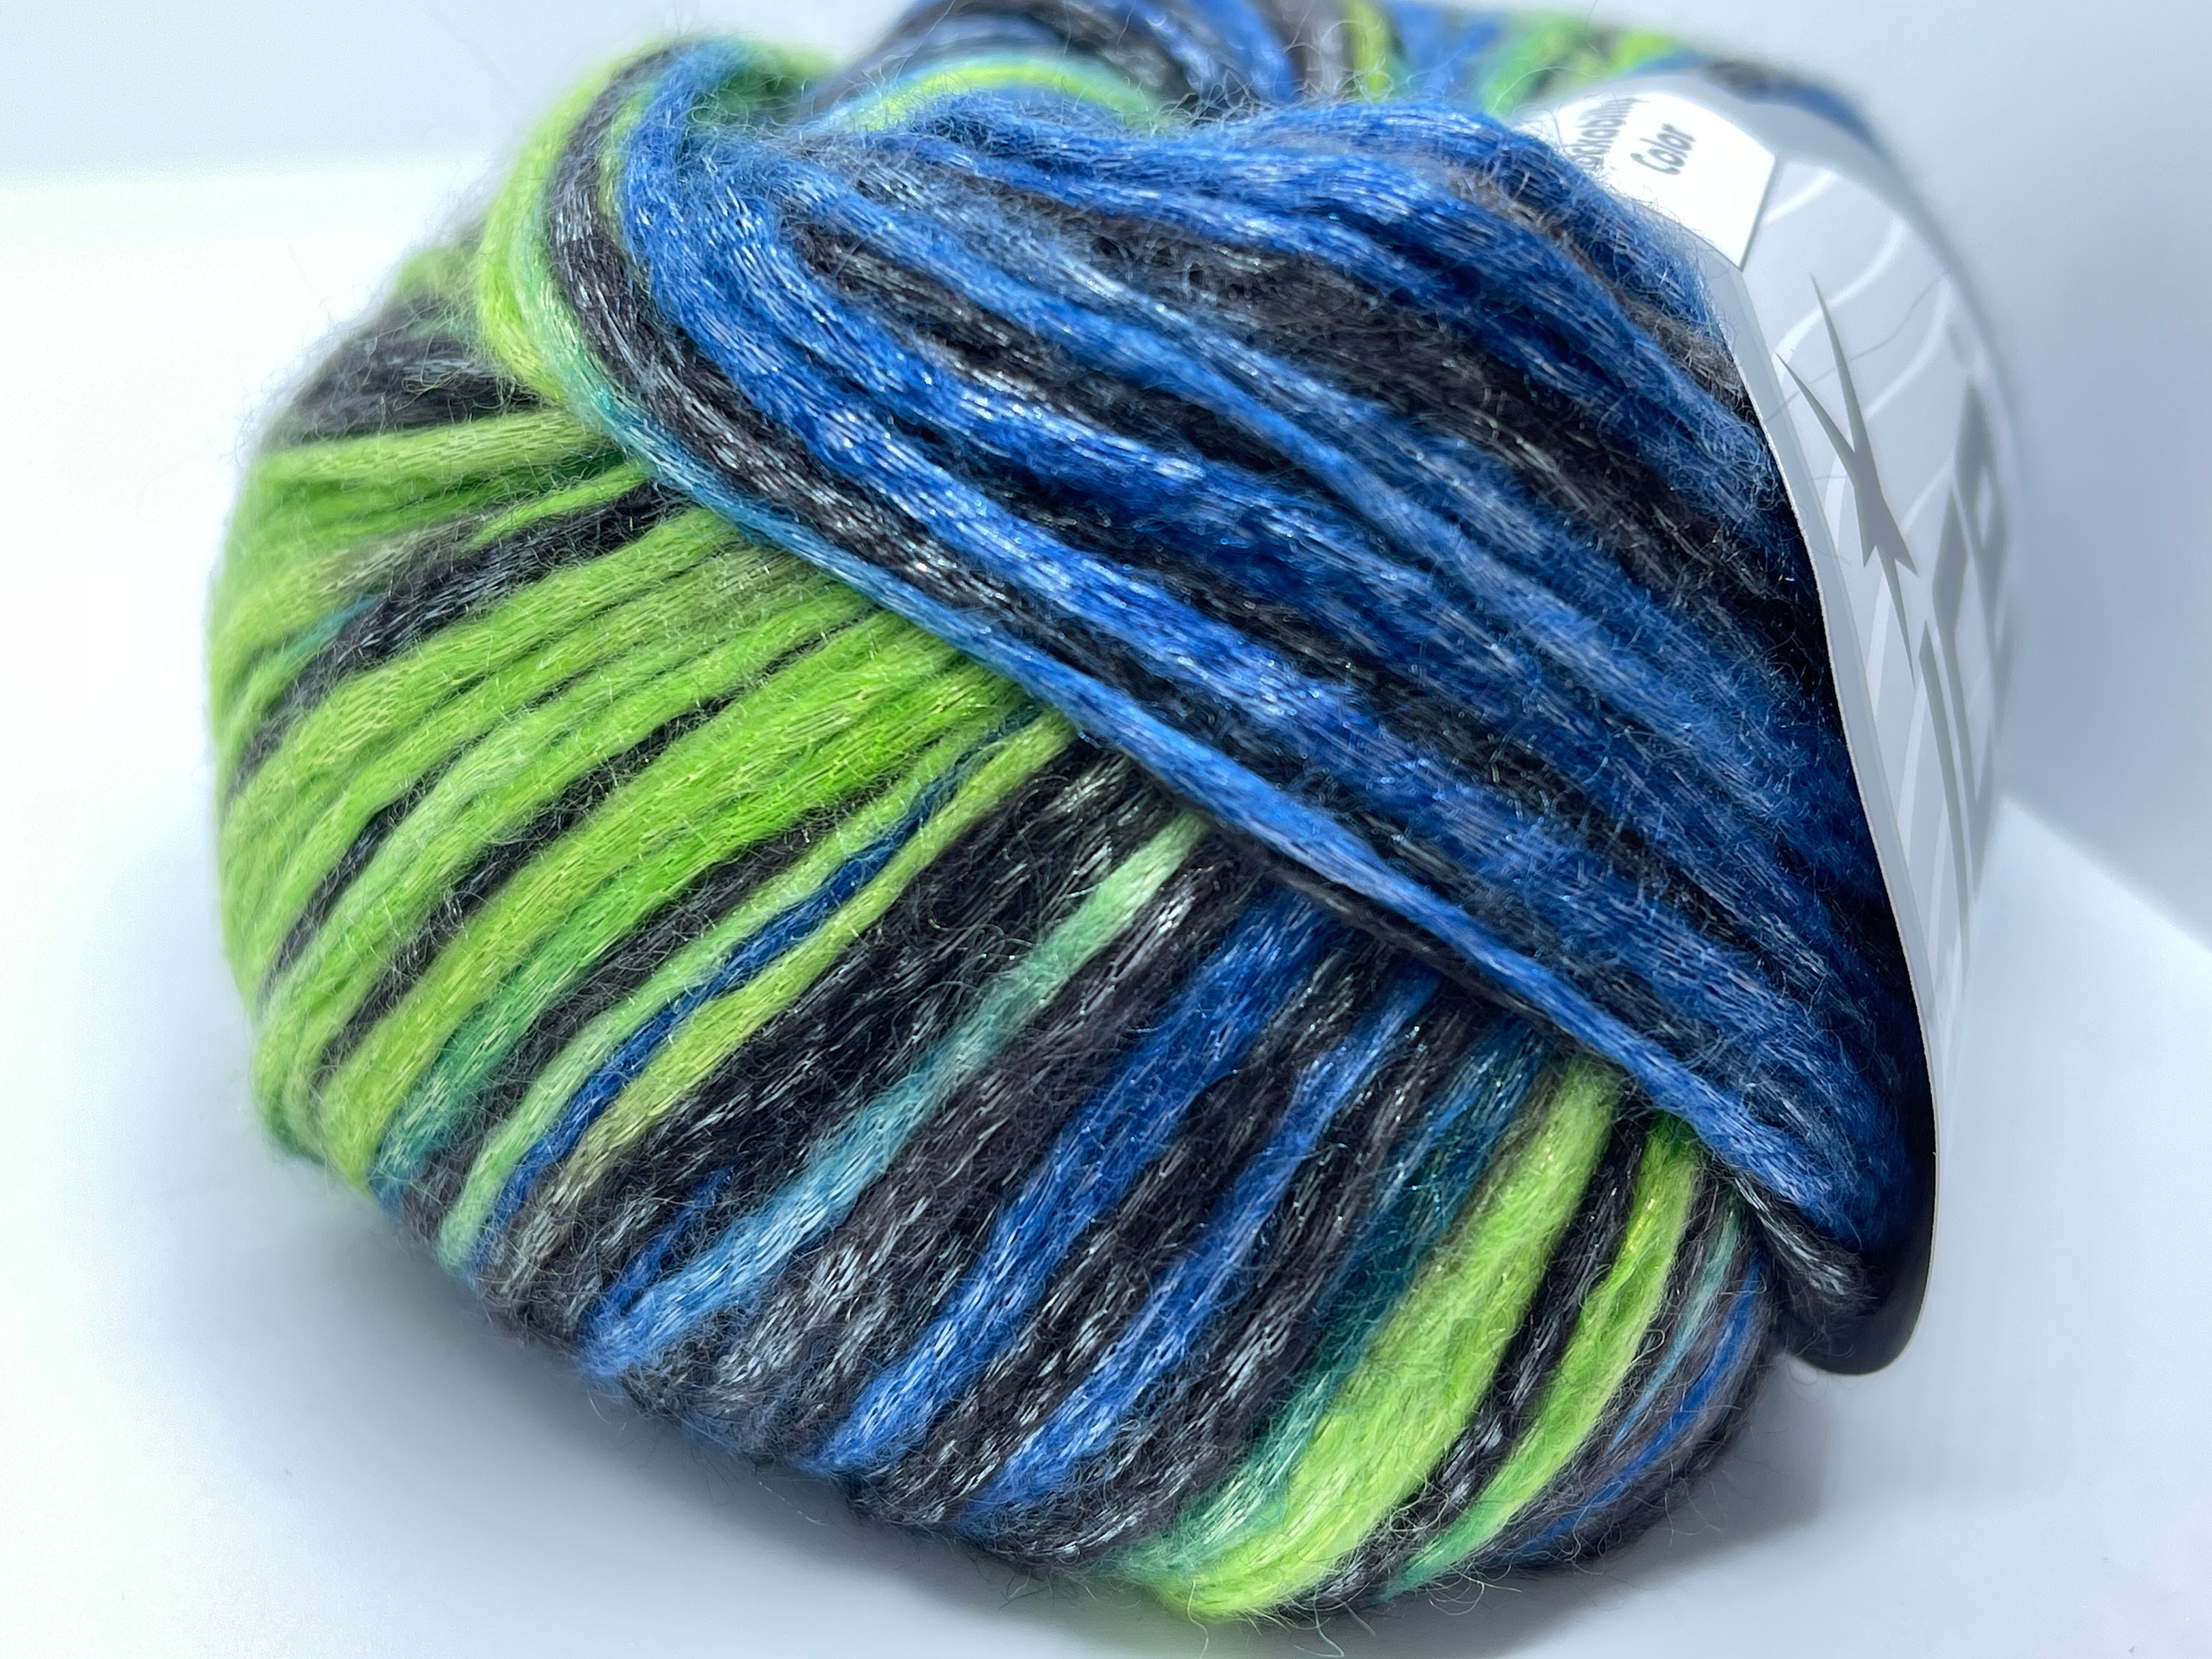 The Fuzzy Yarn Marbled Glacial Green